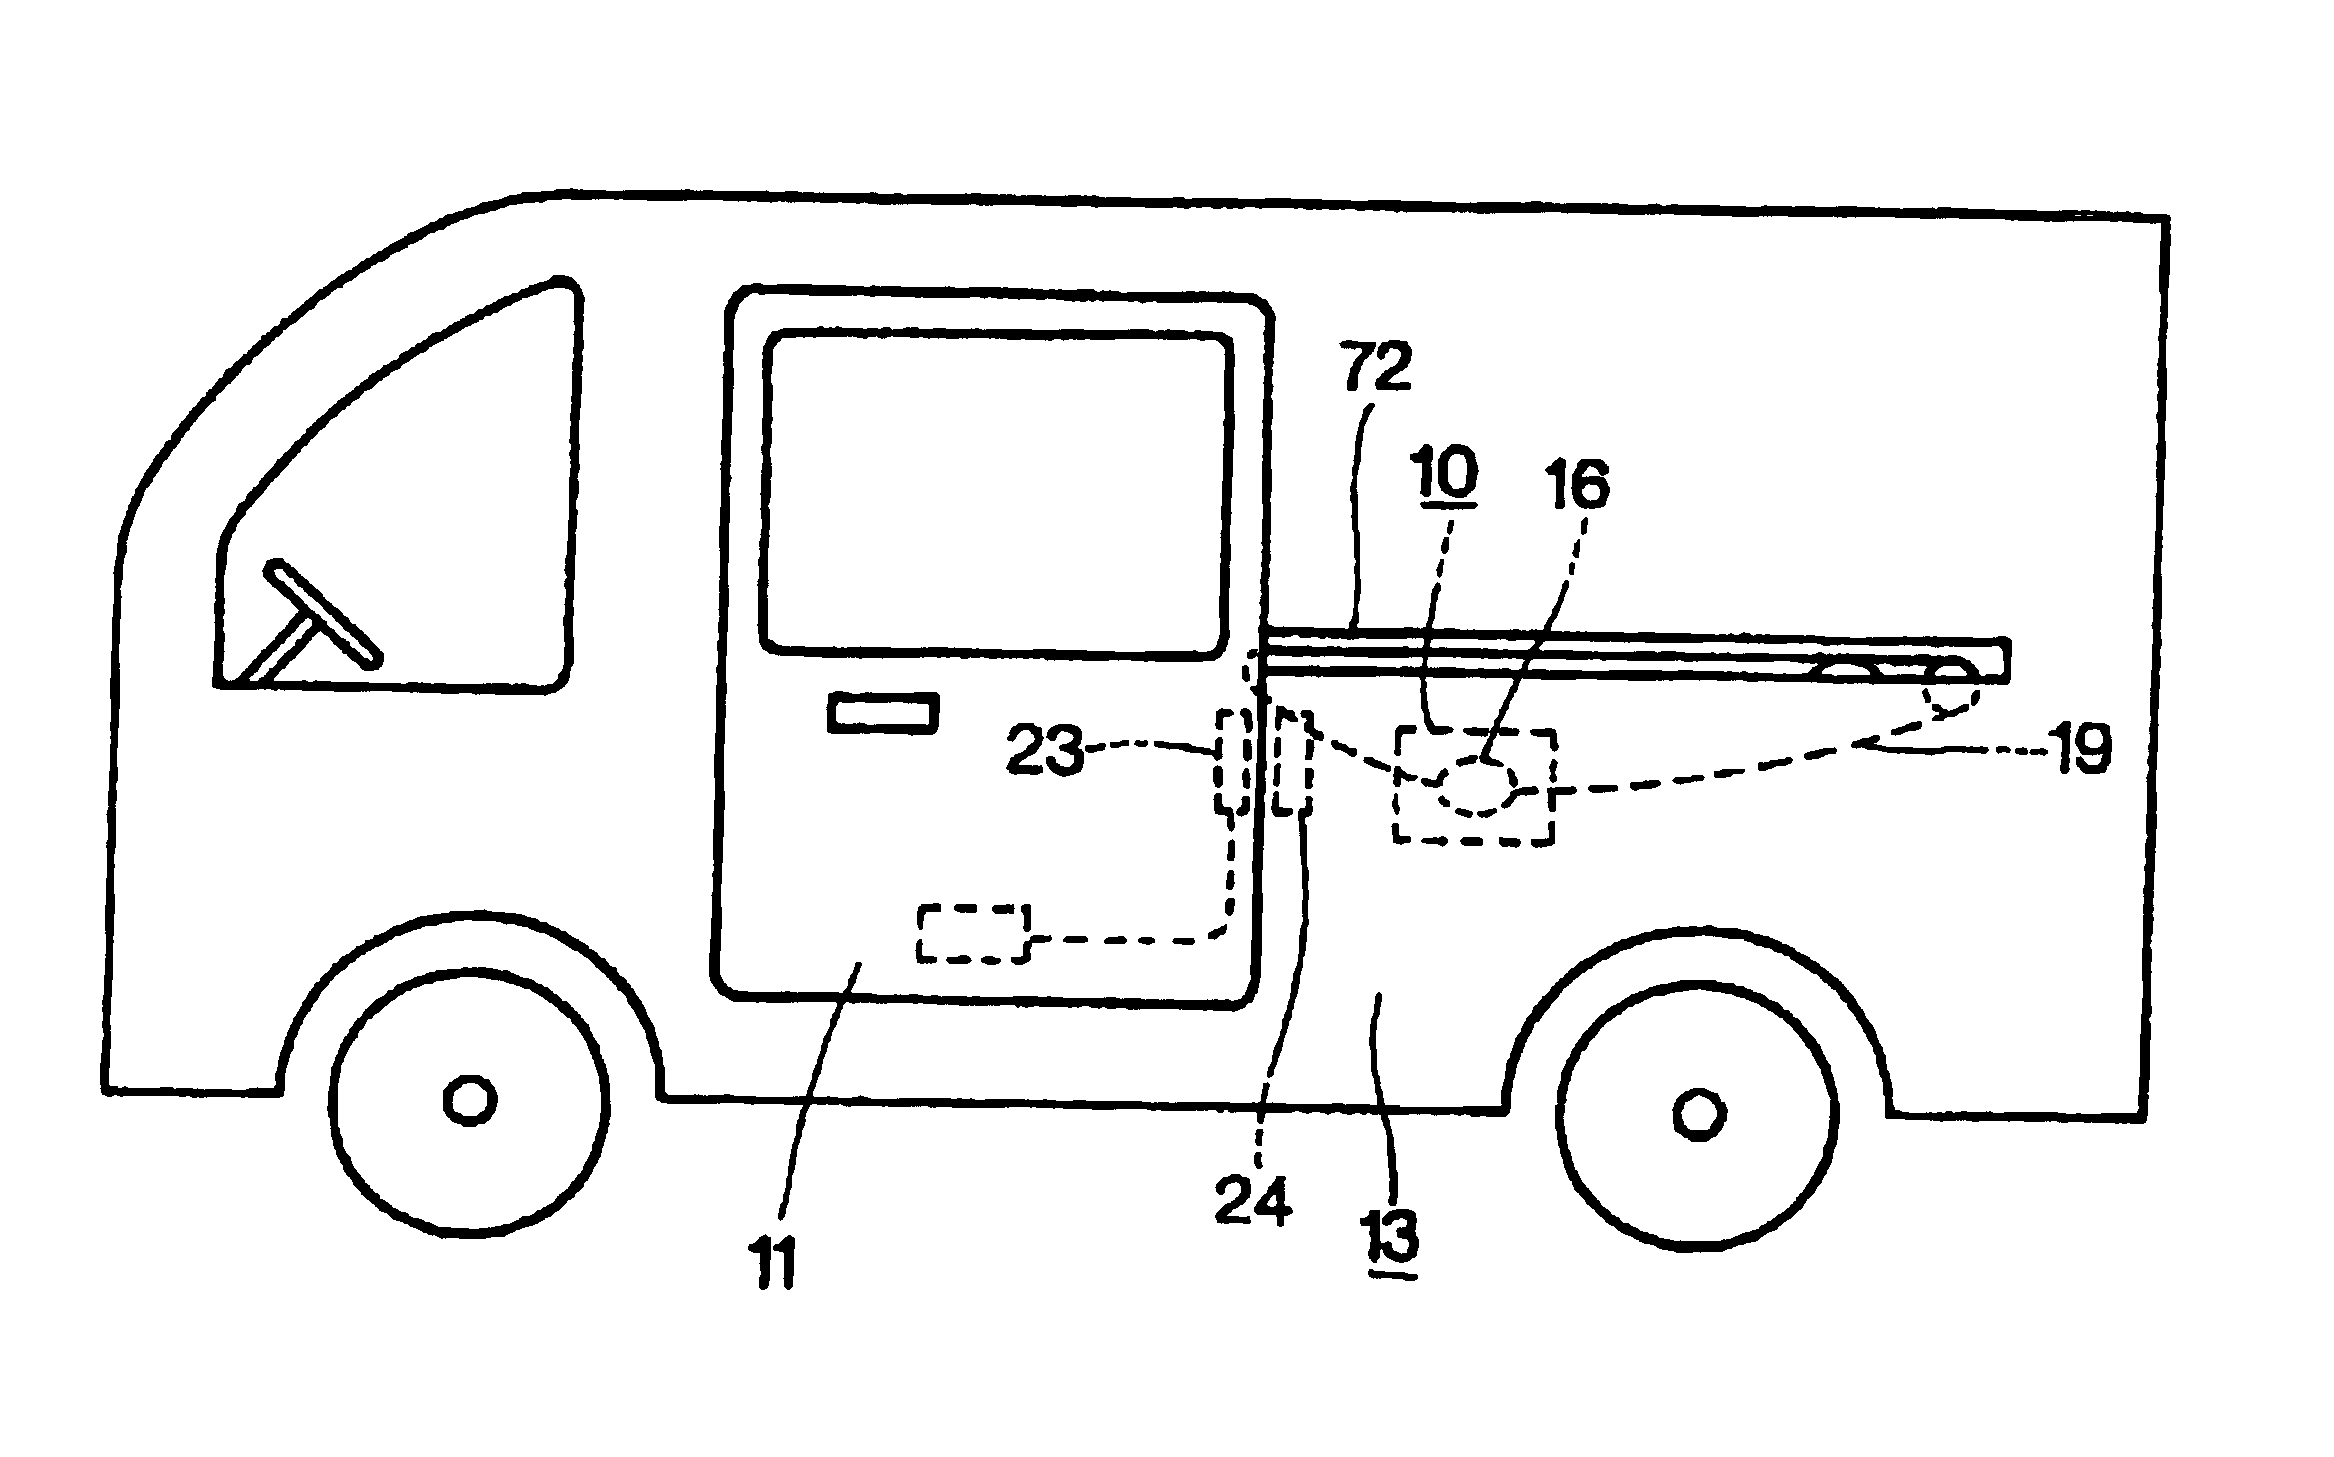 Control method of sliding a vehicle door by a powered sliding device